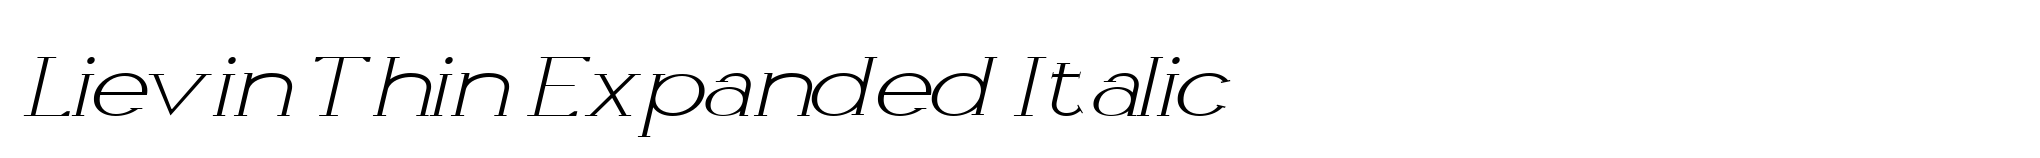 Lievin Thin Expanded Italic image